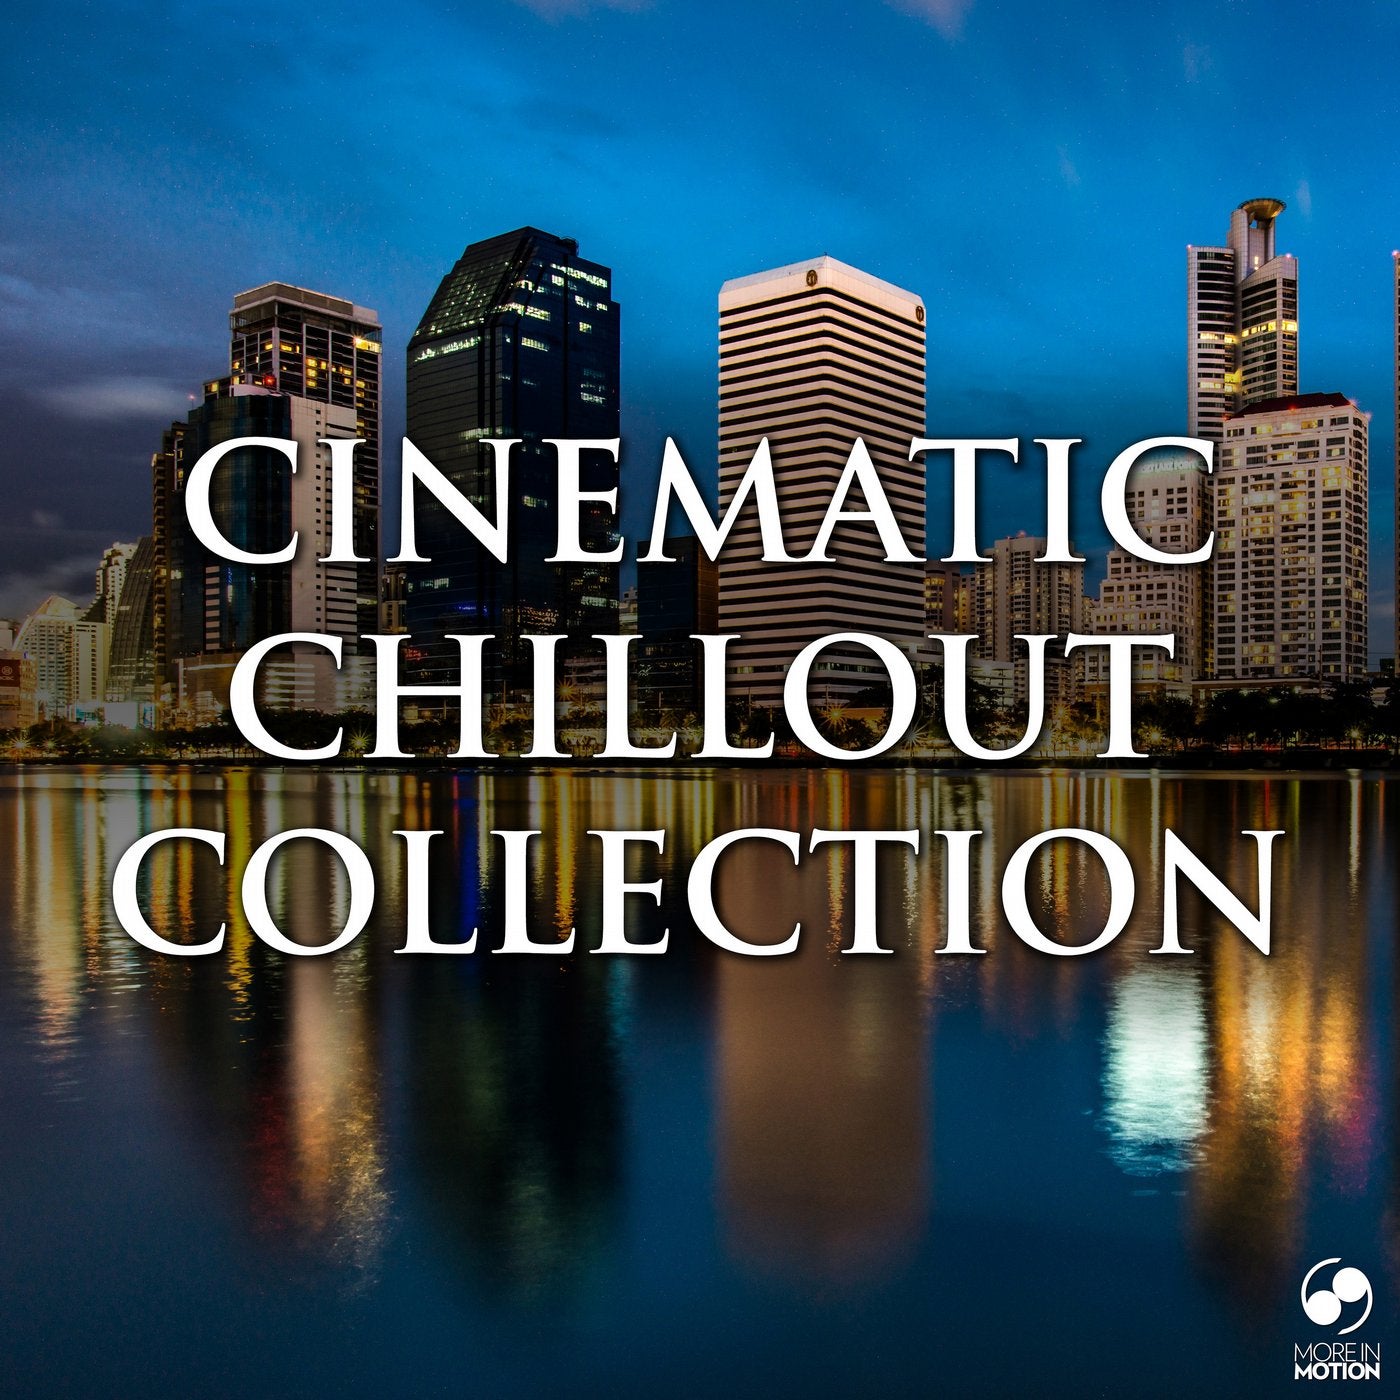 Cinematic Chillout Collection